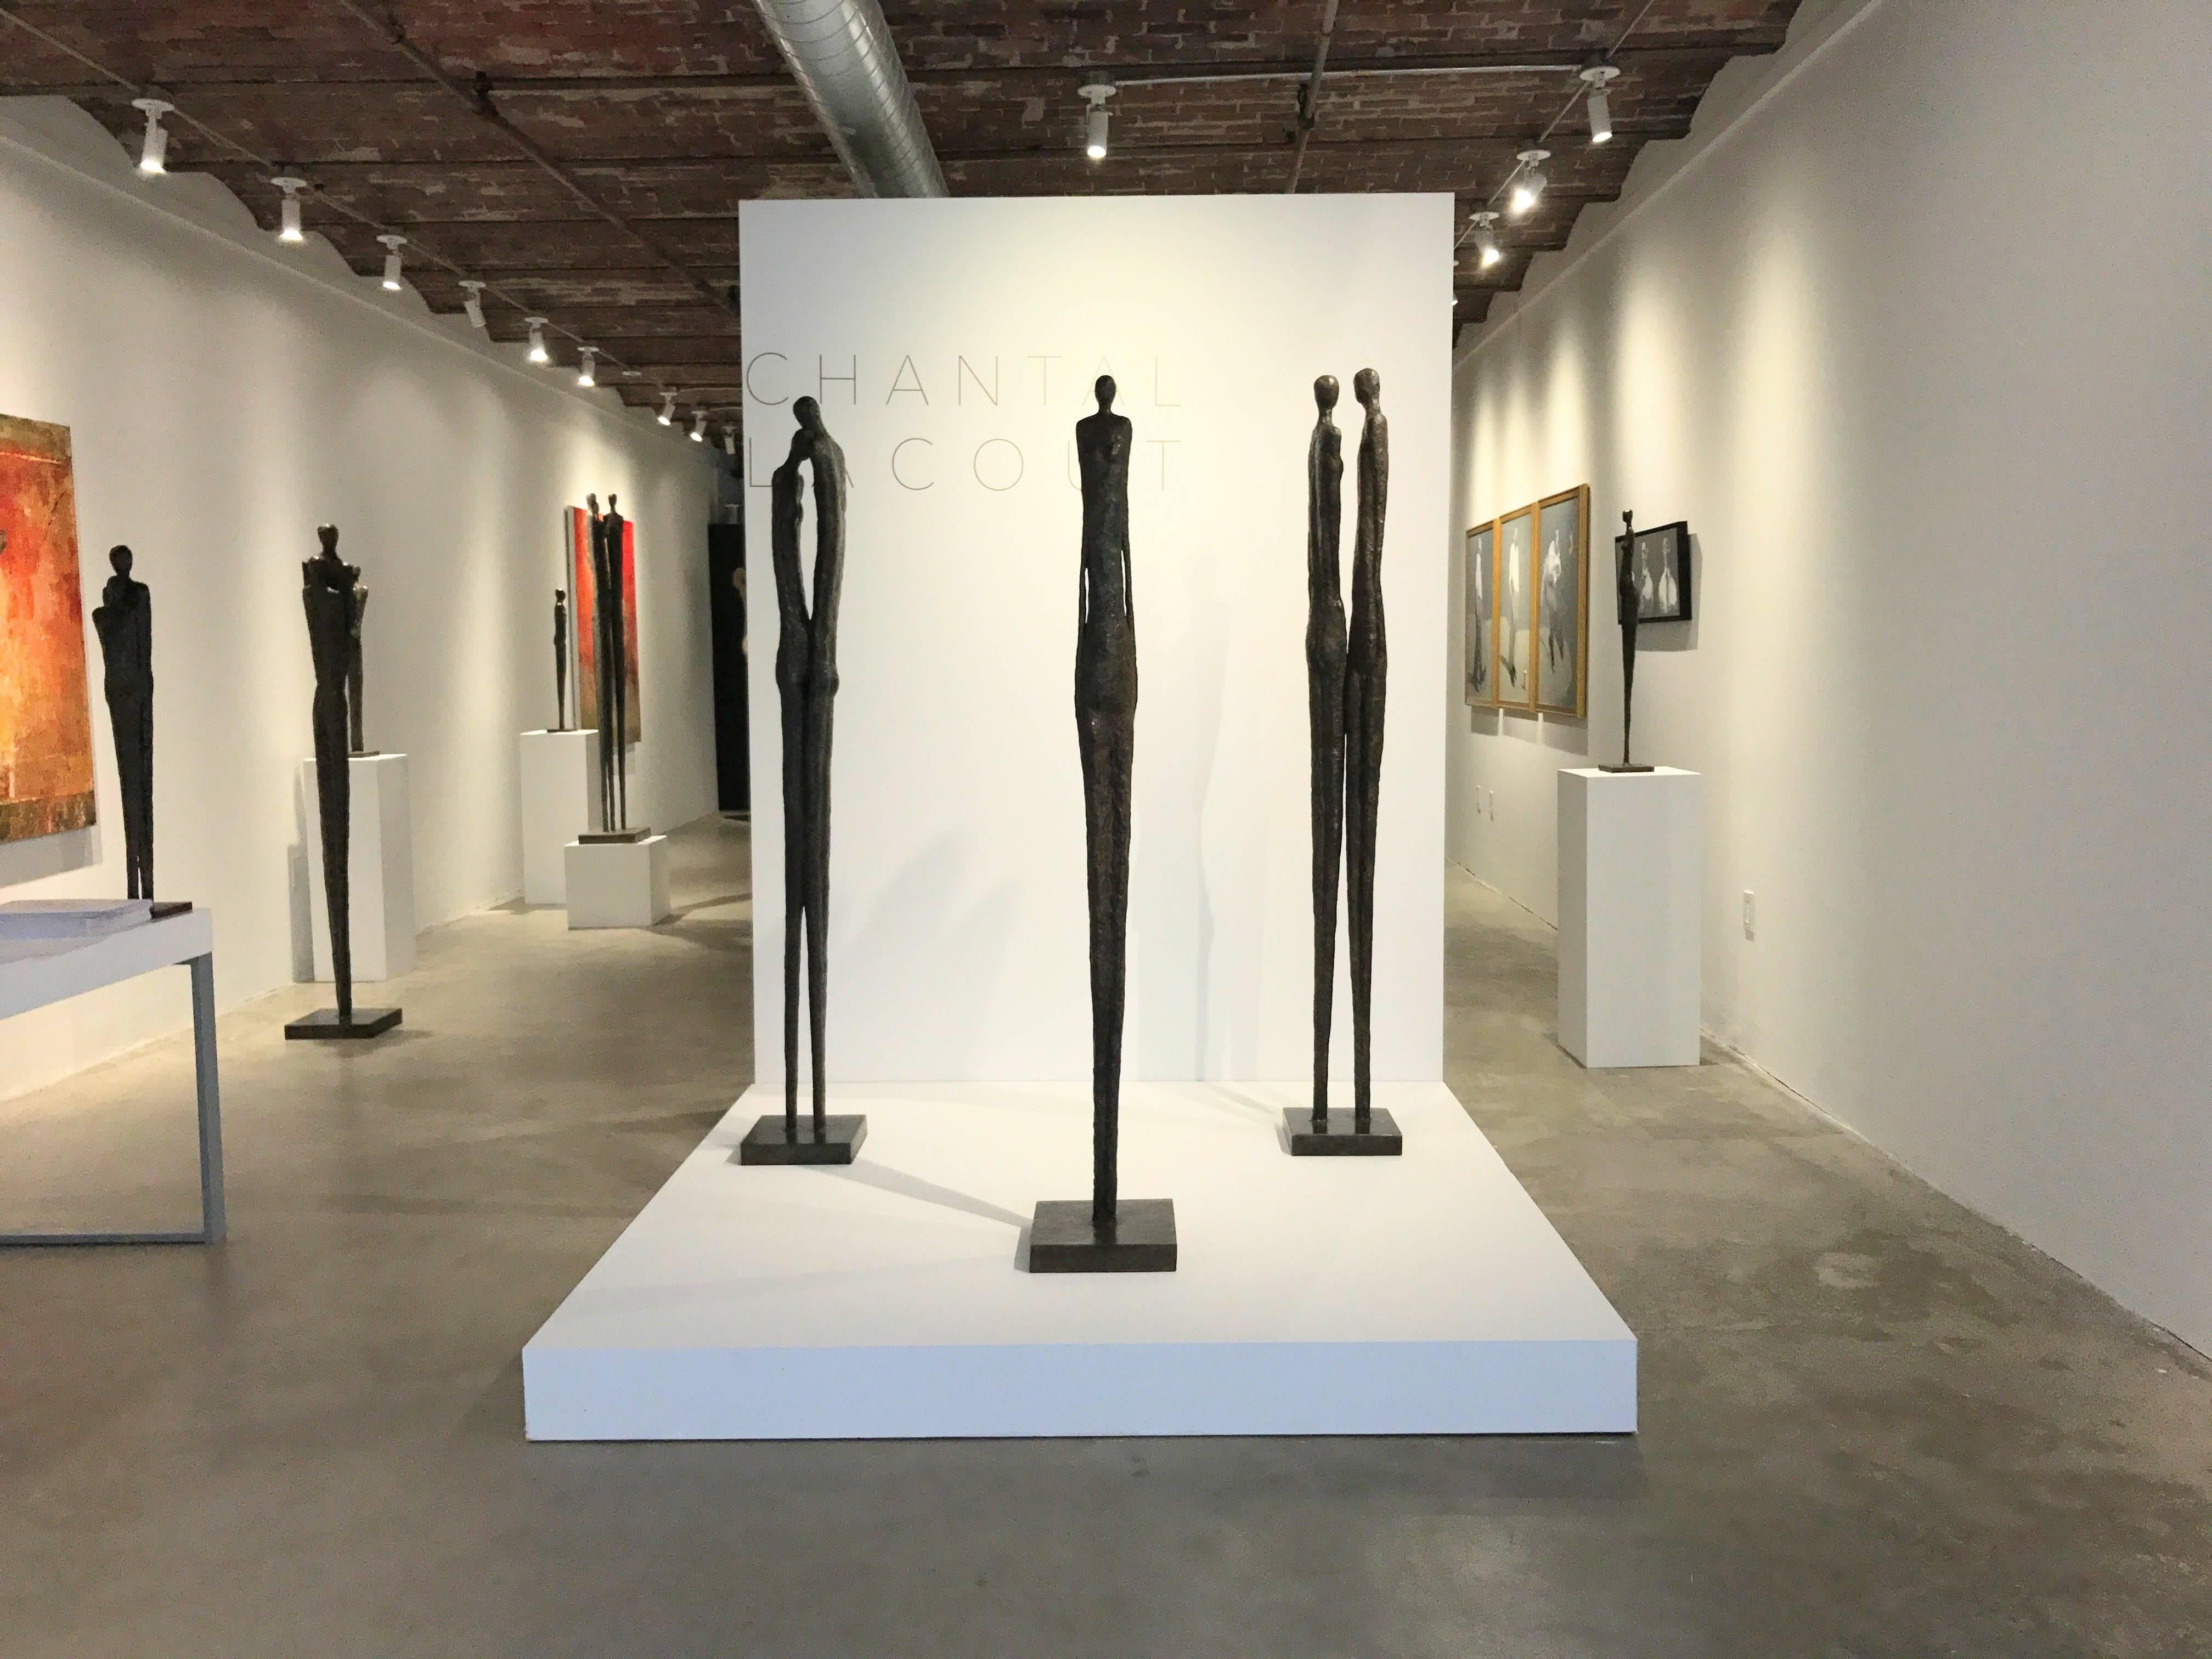 long and narrow shape of female form, human figure simplified, bronze color tone, womanly powerful presence
Chantal Lacout was born in 1943 in Le Blanc, France. As a young child, she played with clay and had an immediate draw towards creating art.